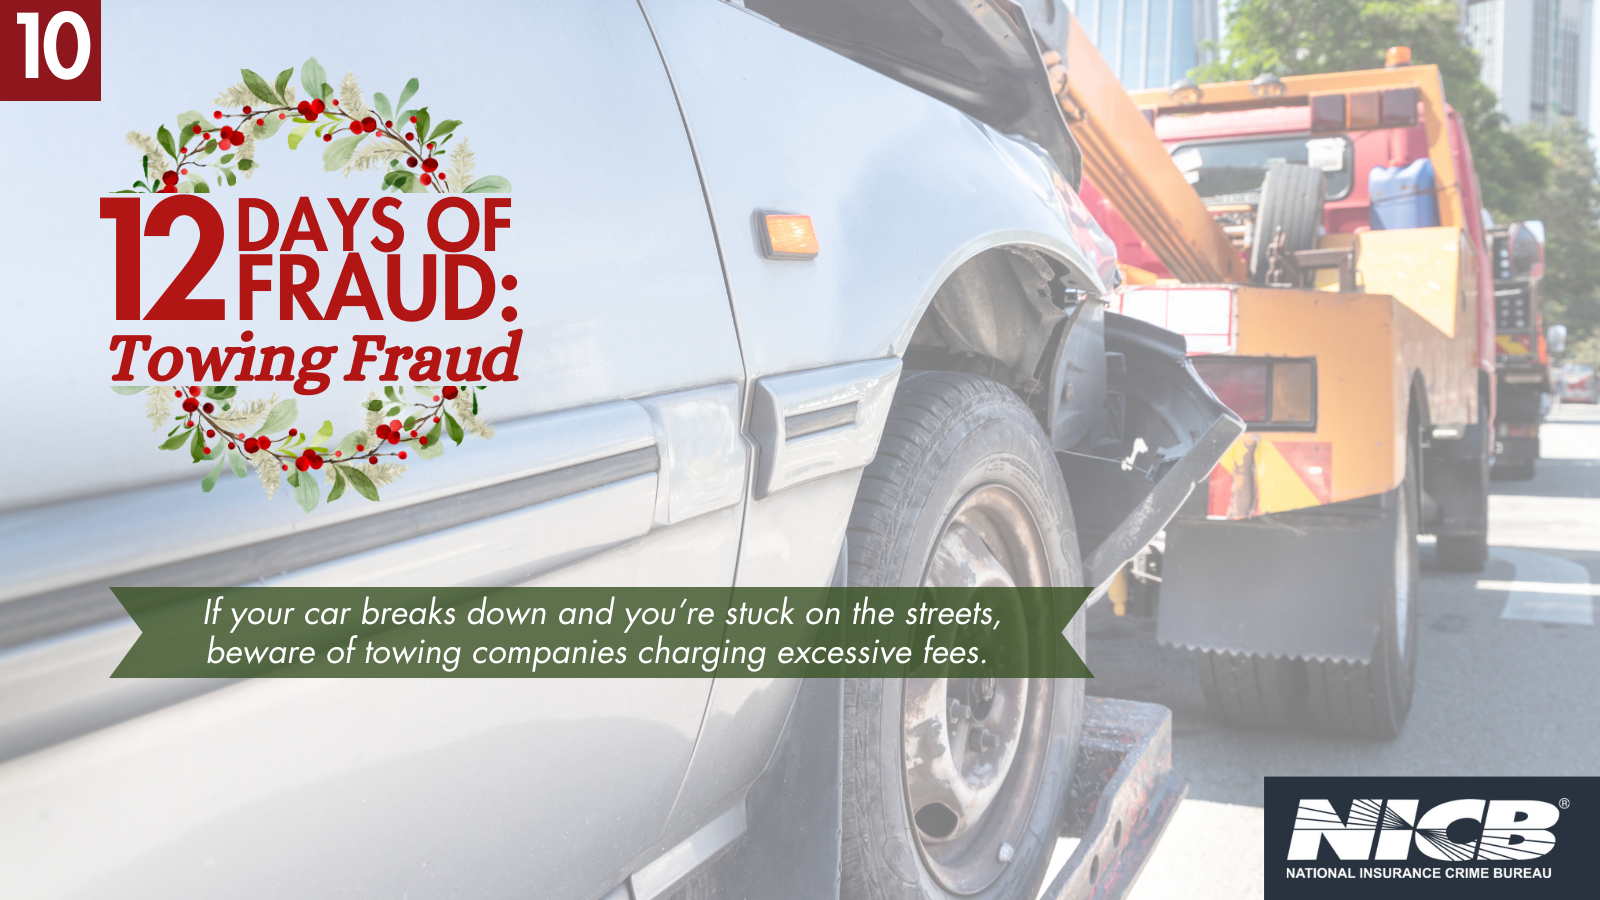 If your car breaks down and you're stuck on the streets, beware of towing companies charging excessive fees.